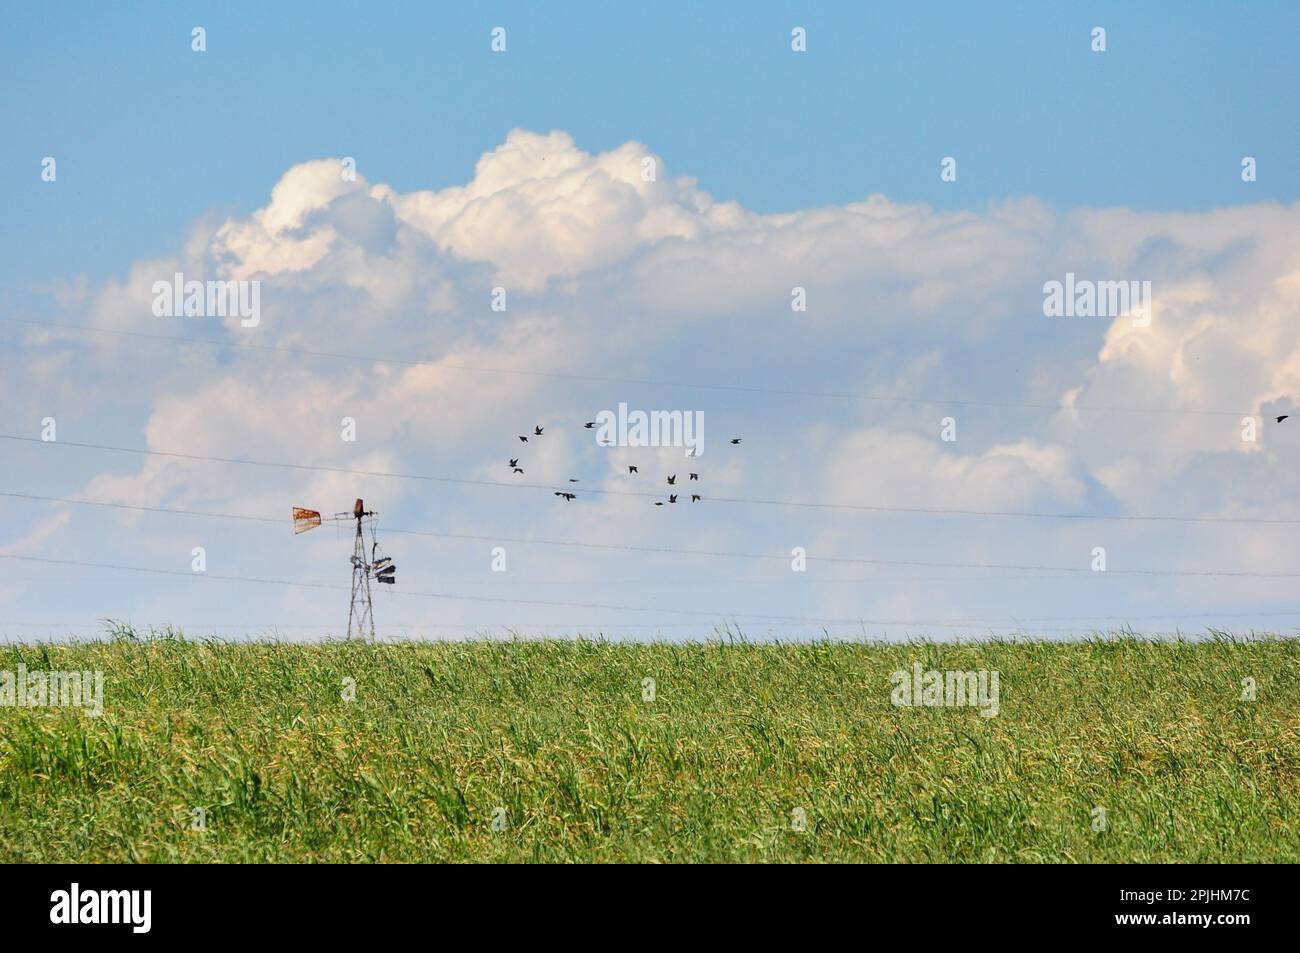 Field with power lines and a flock of birds flying, and a sky with many clouds Stock Photo